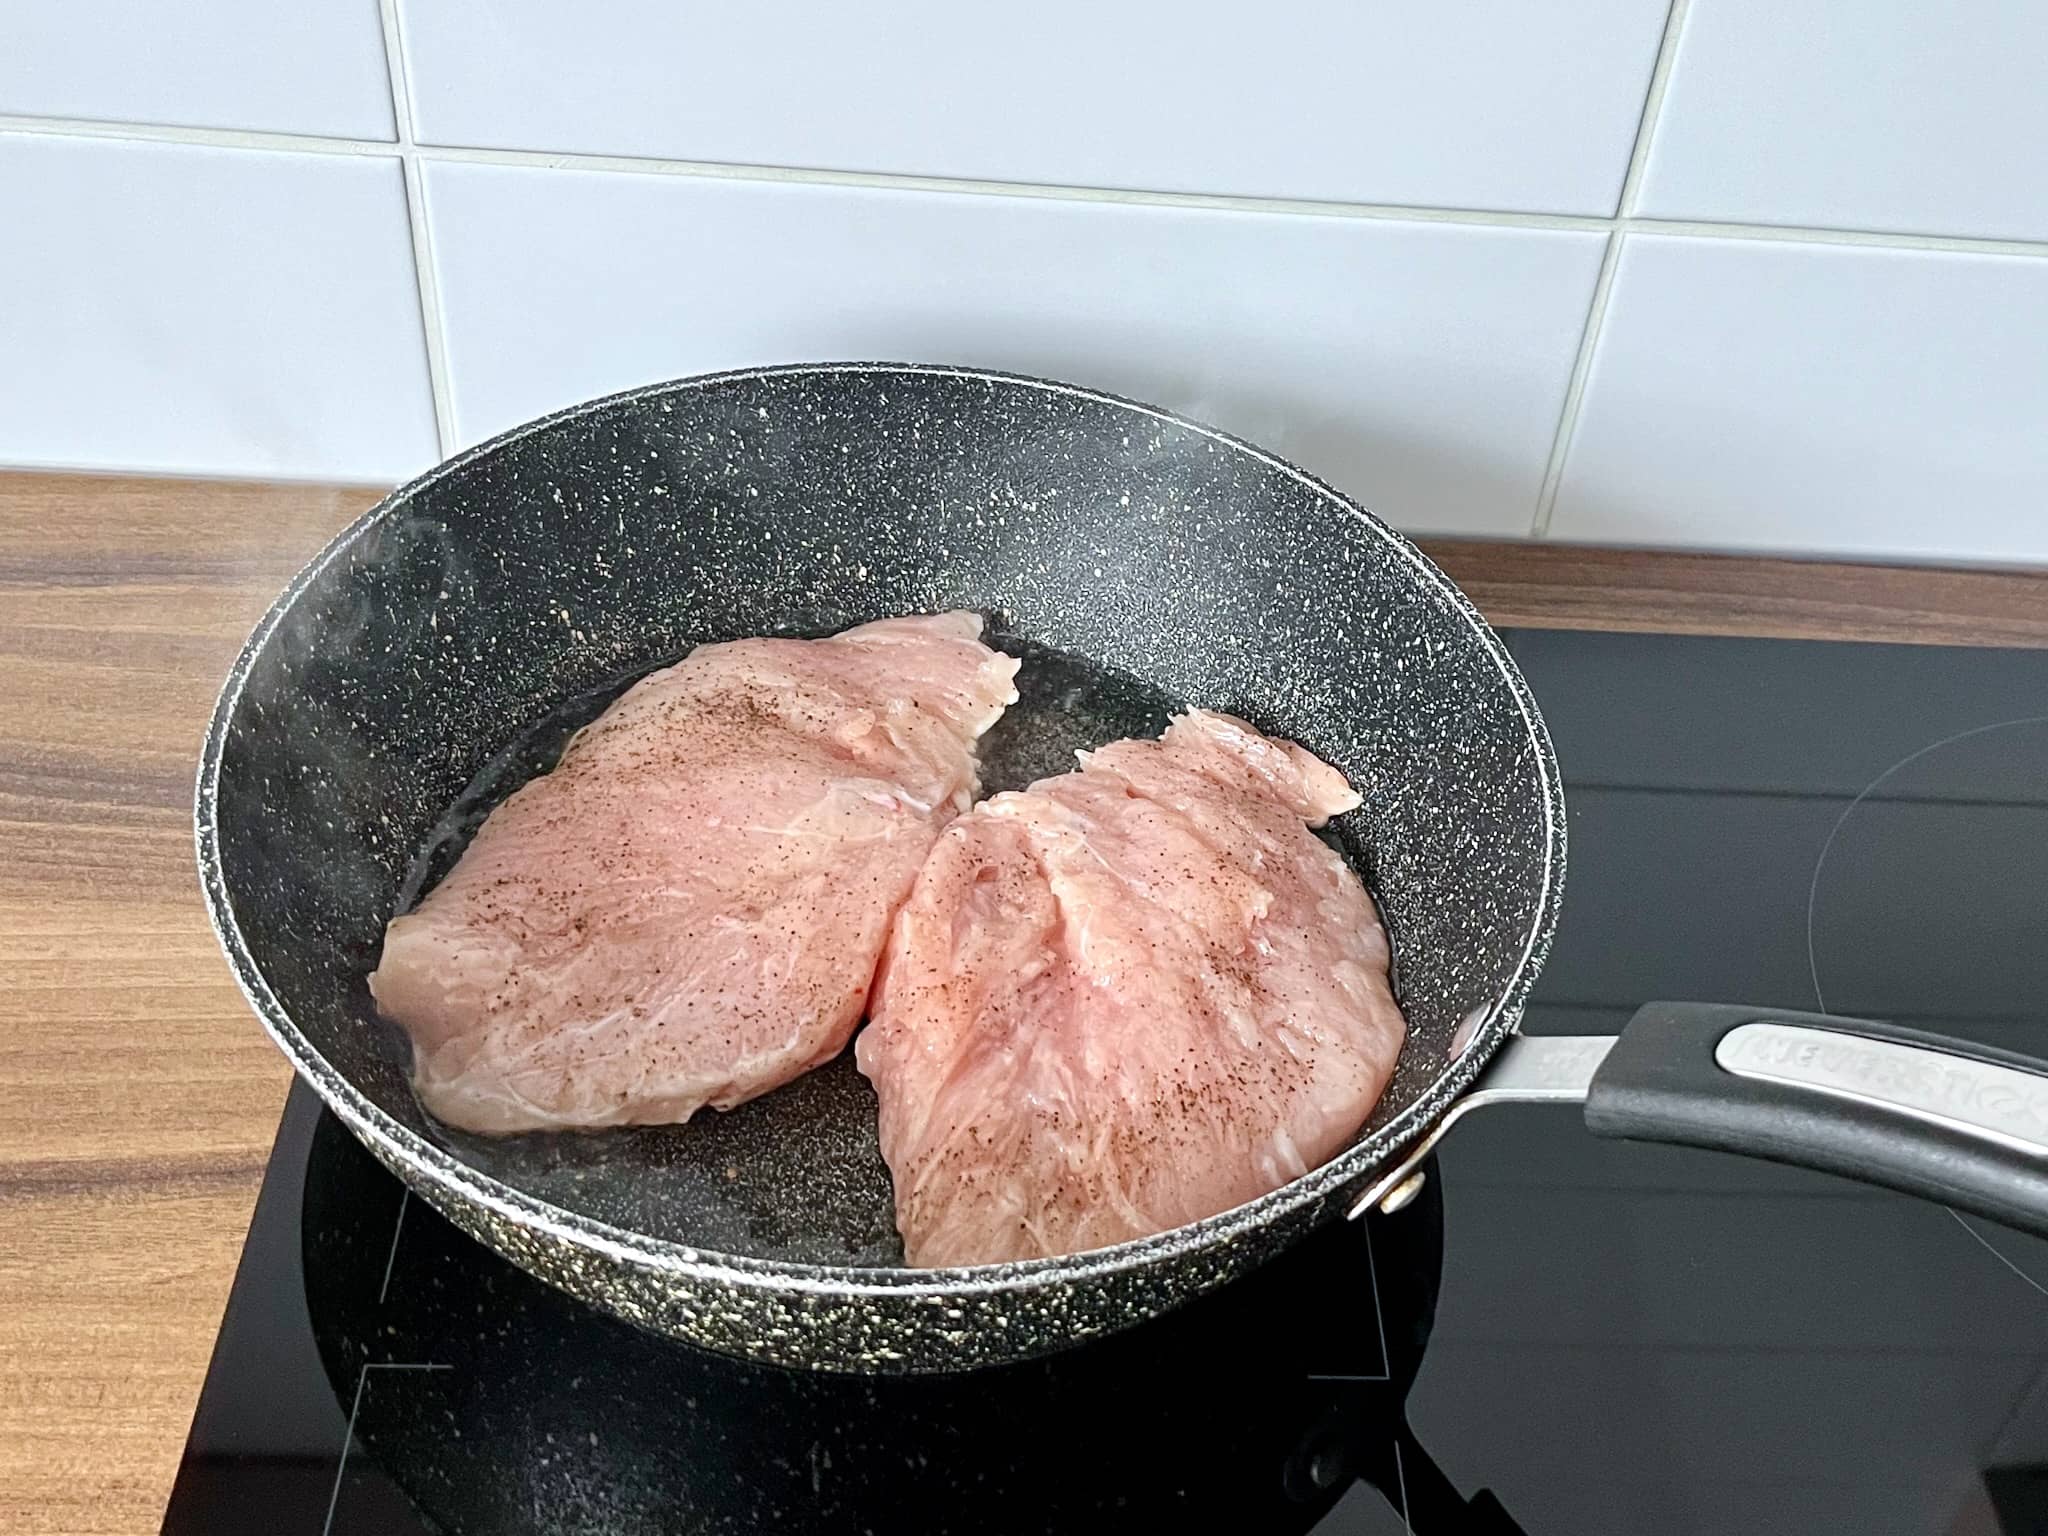 Chicken breasts seasoned with salt and pepper frying in a pan